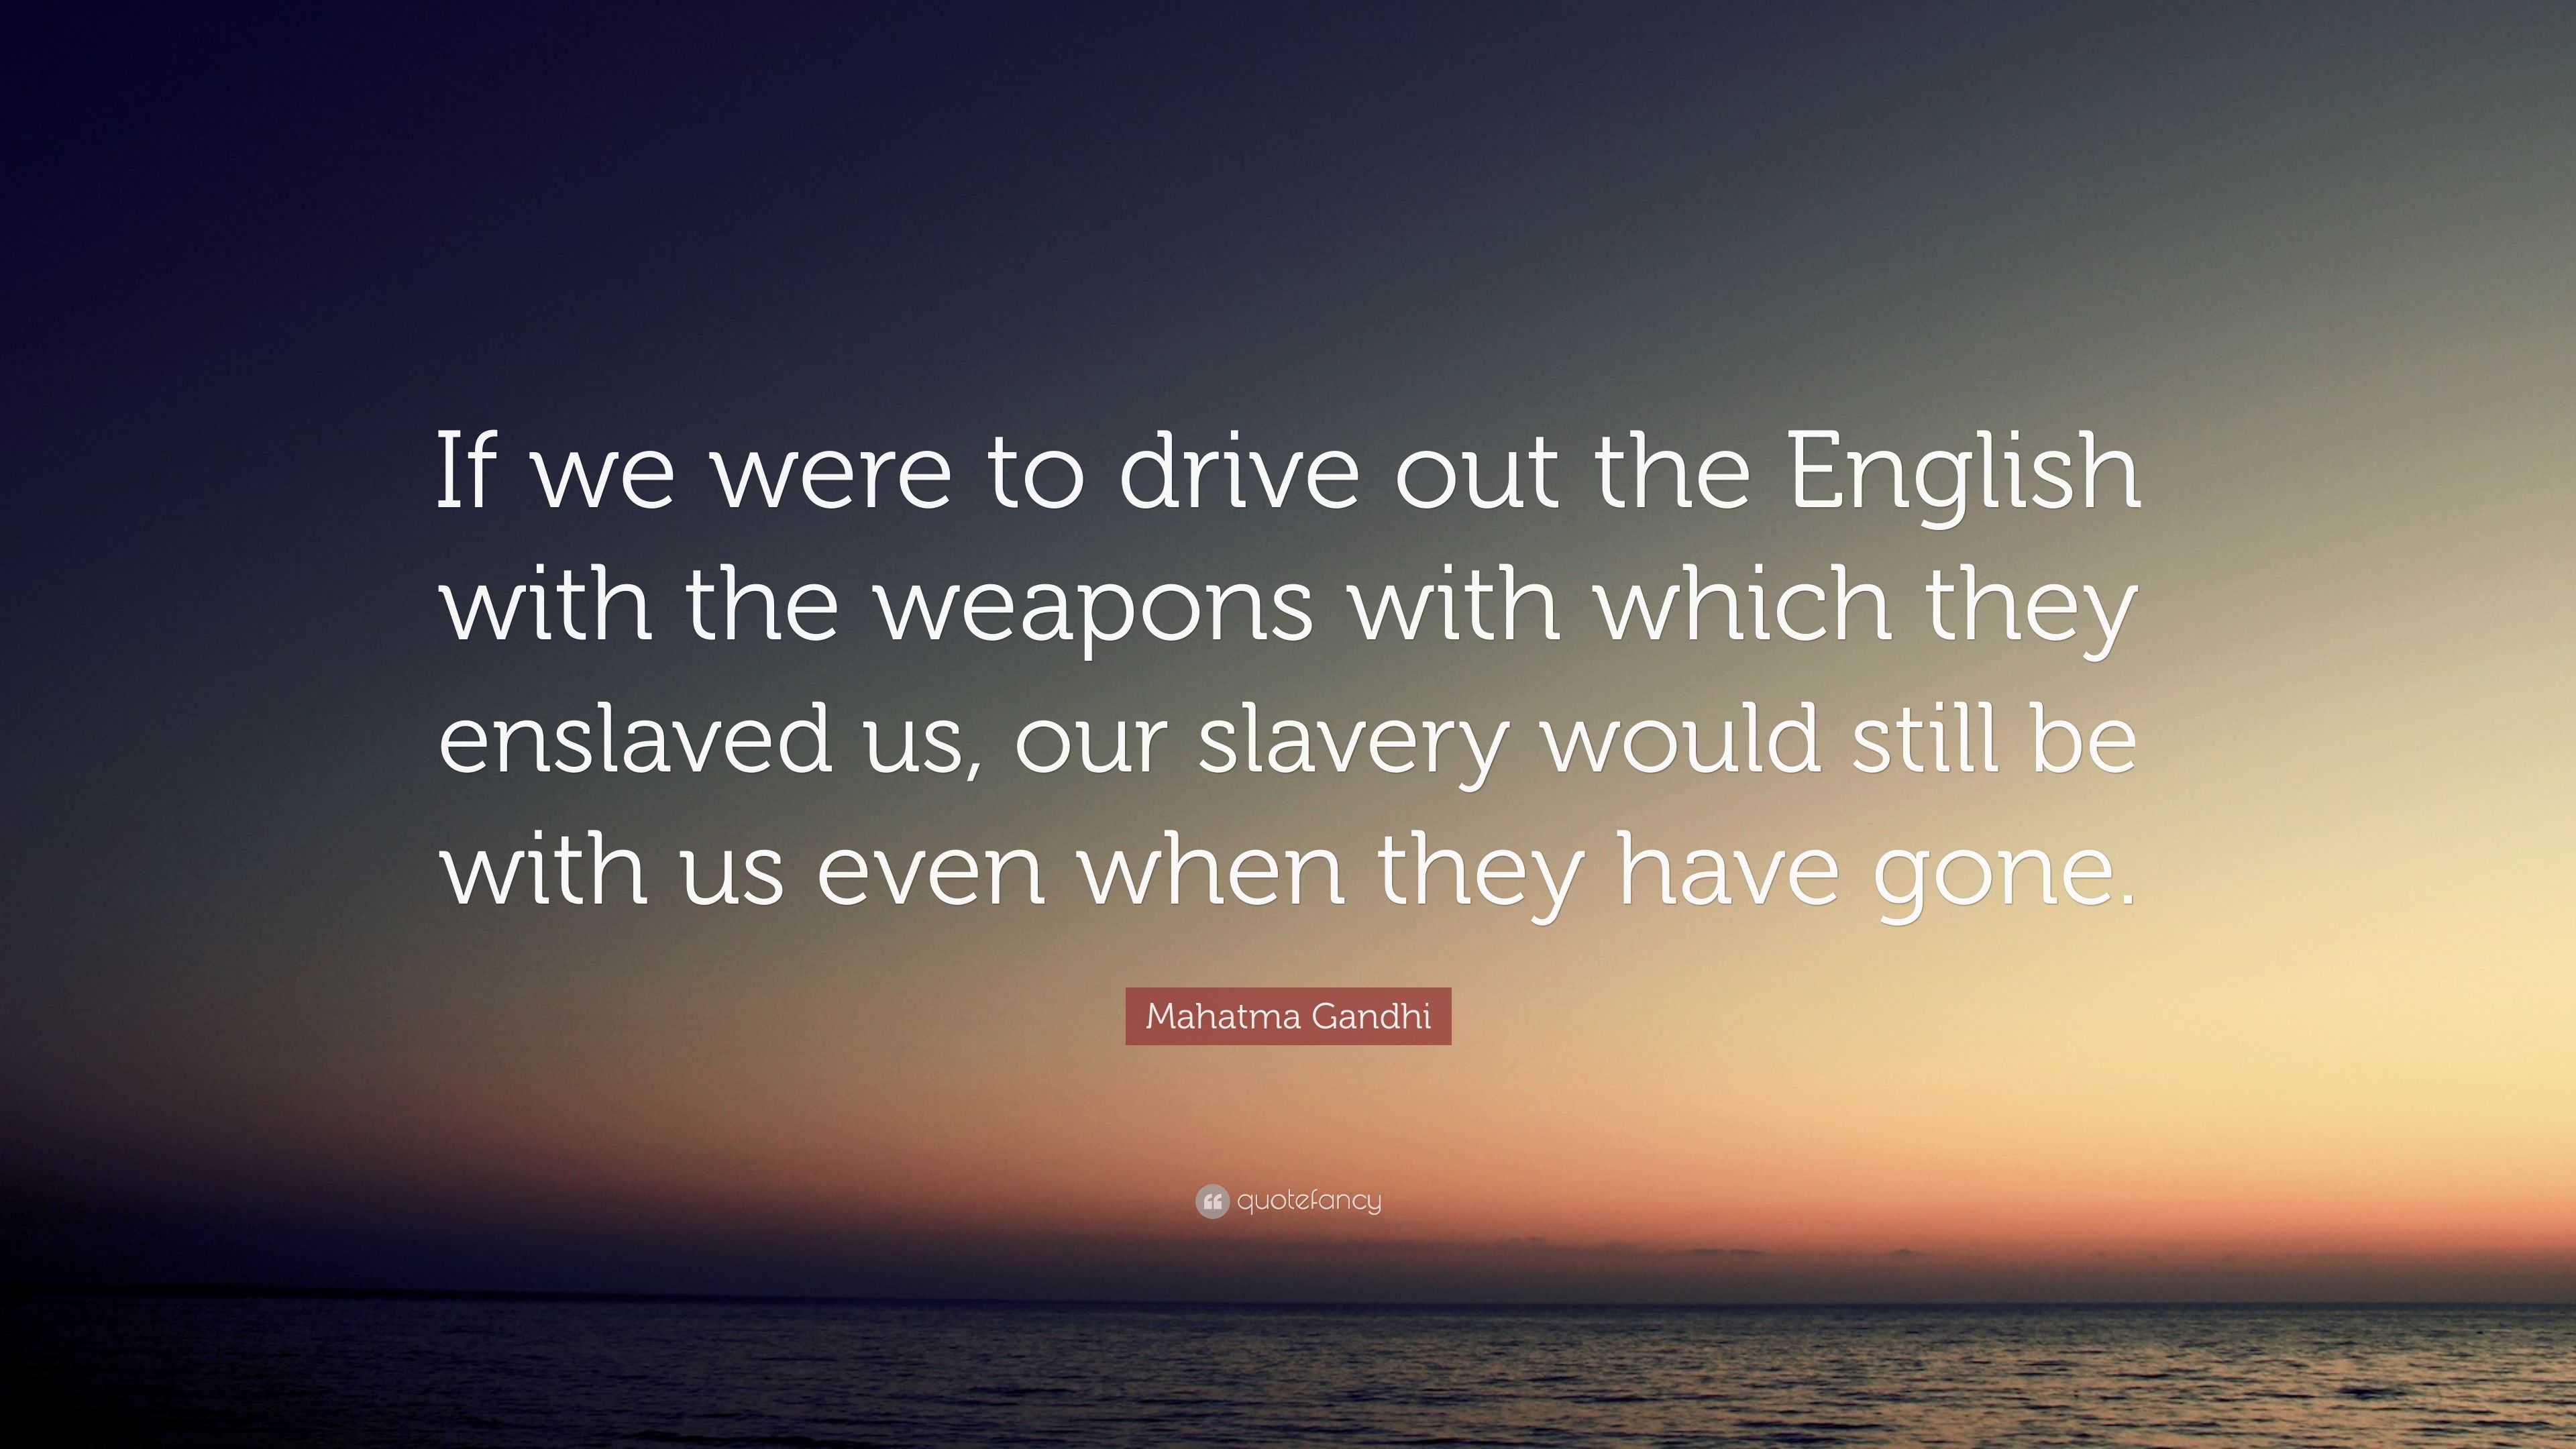 Mahatma Gandhi Quote: “If we were to drive out the English with the ...